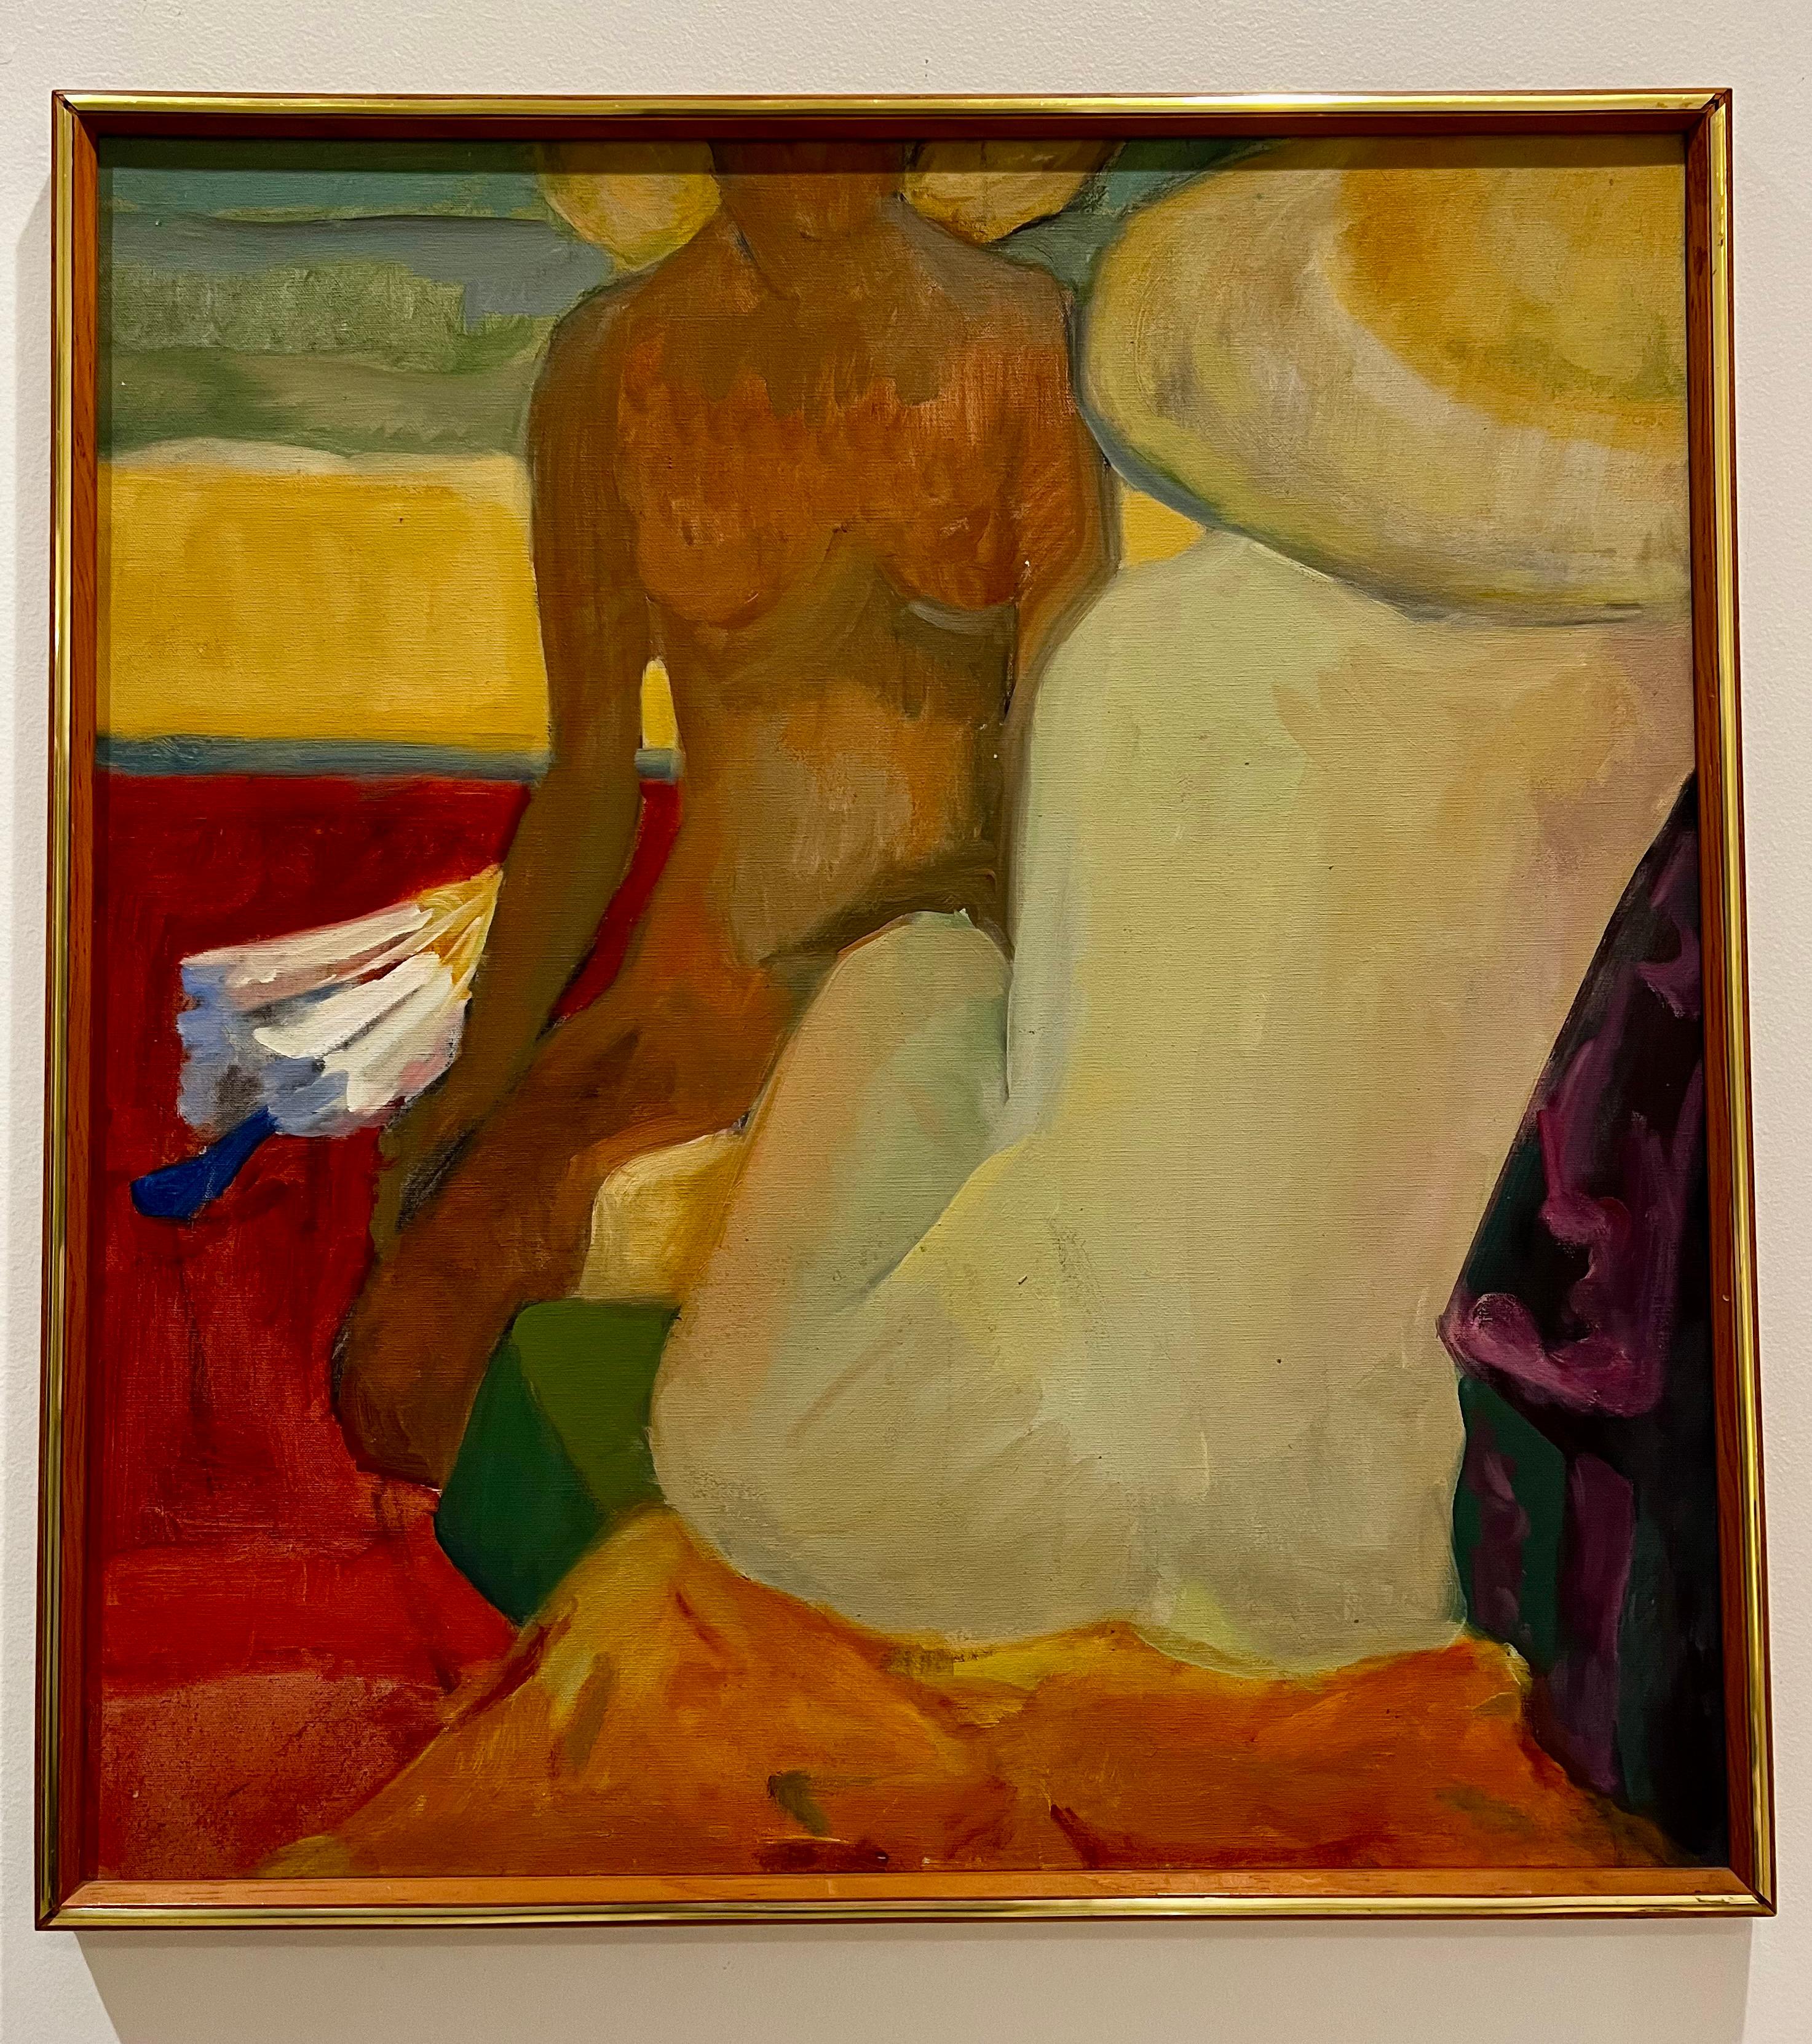 20th century American School Nude Painting - A Day at the Beach